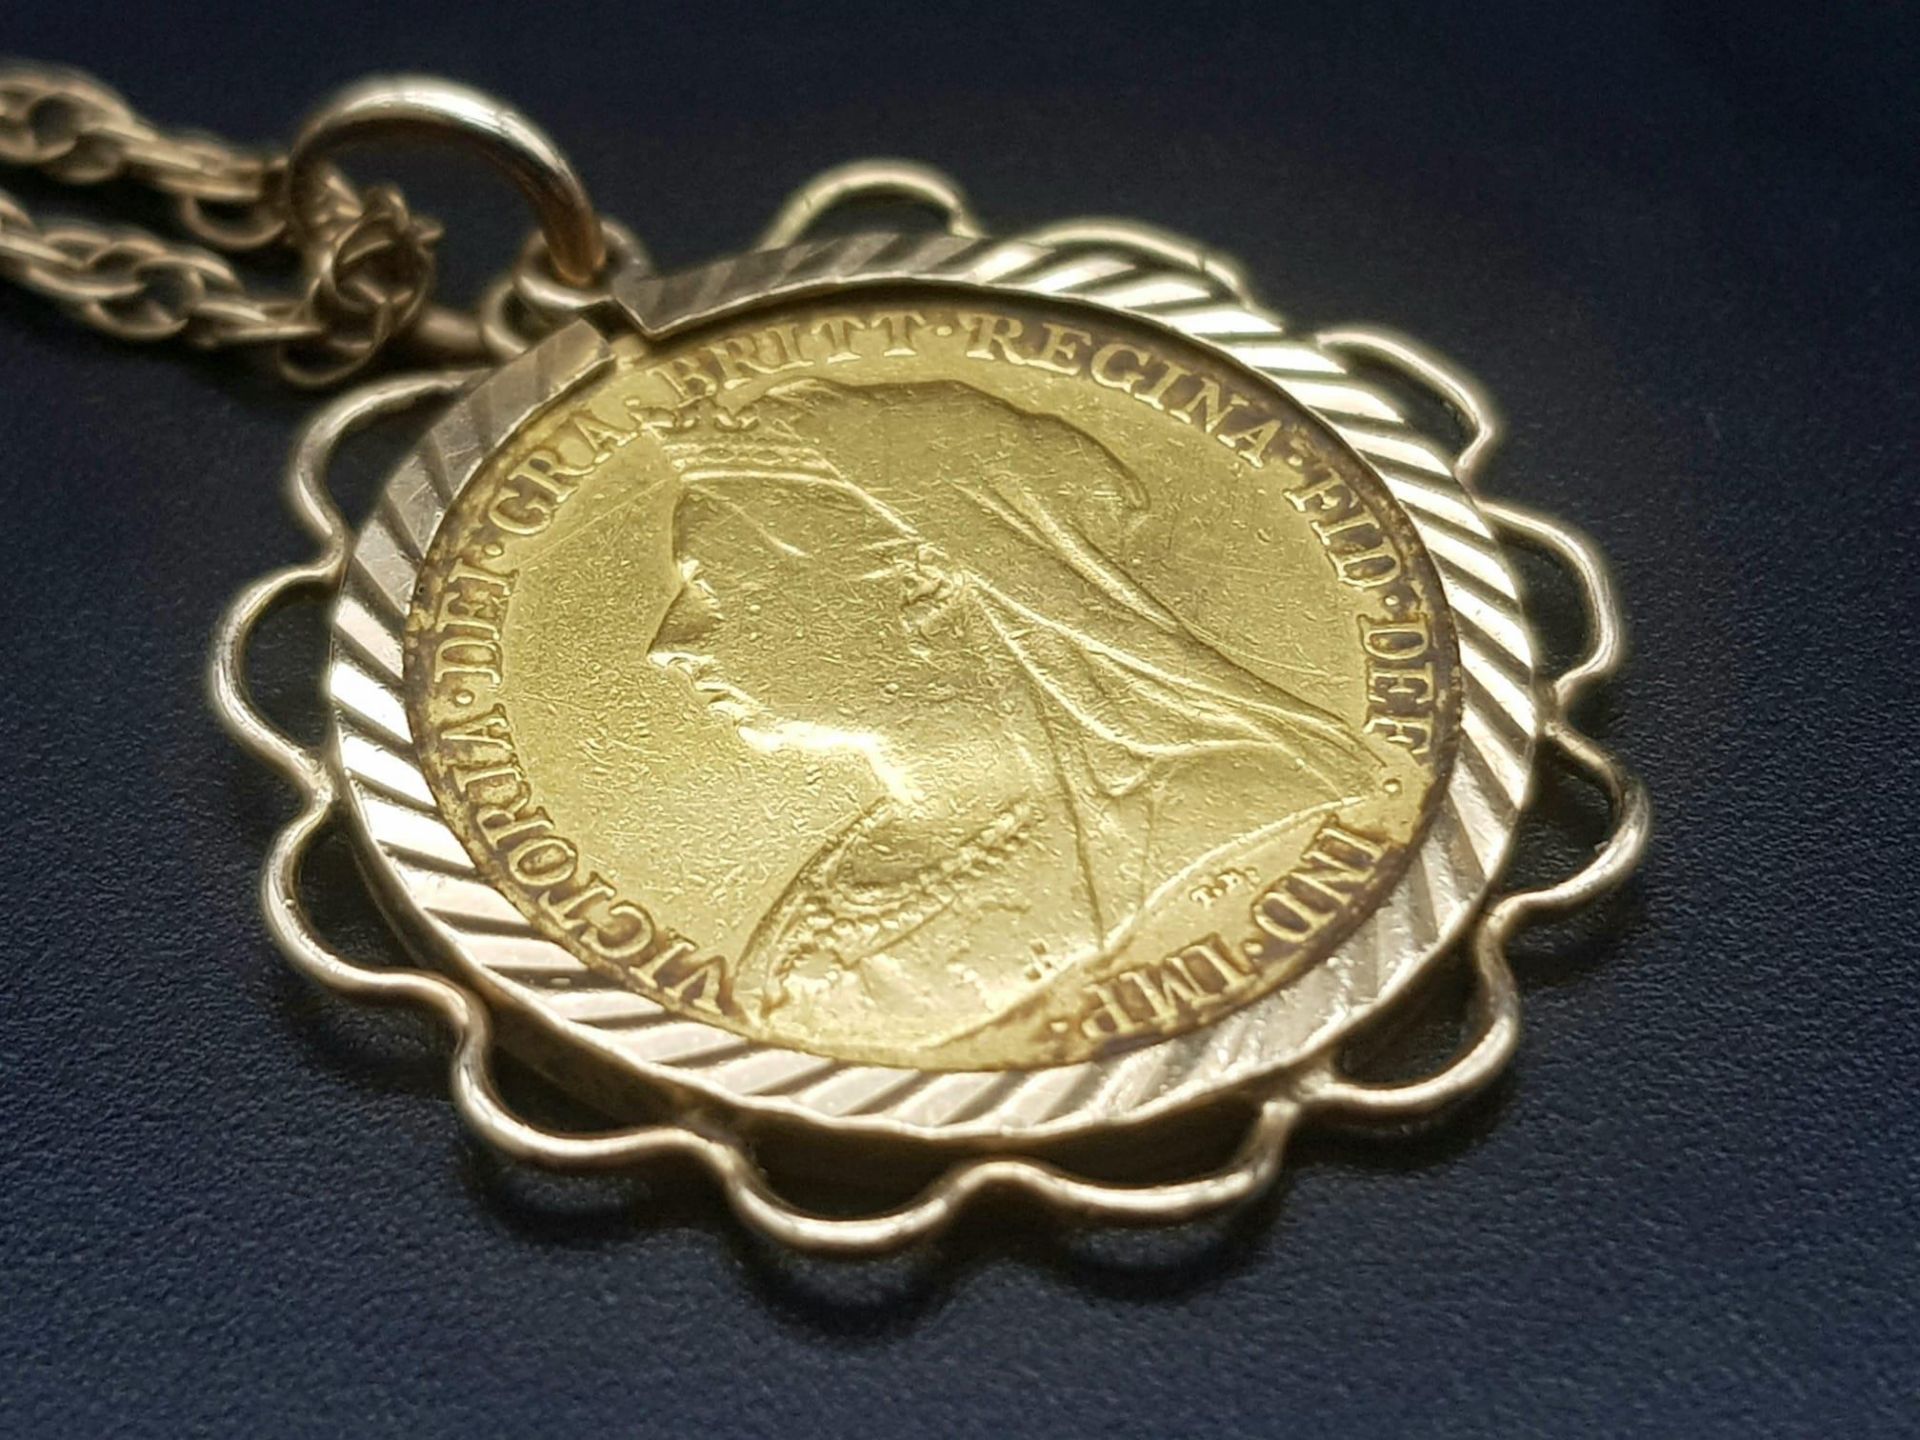 A 1900 22k Gold Queen Victoria Half Sovereign set in a 9K Gold Casing on a 9K Yellow Gold Chain - - Image 5 of 6